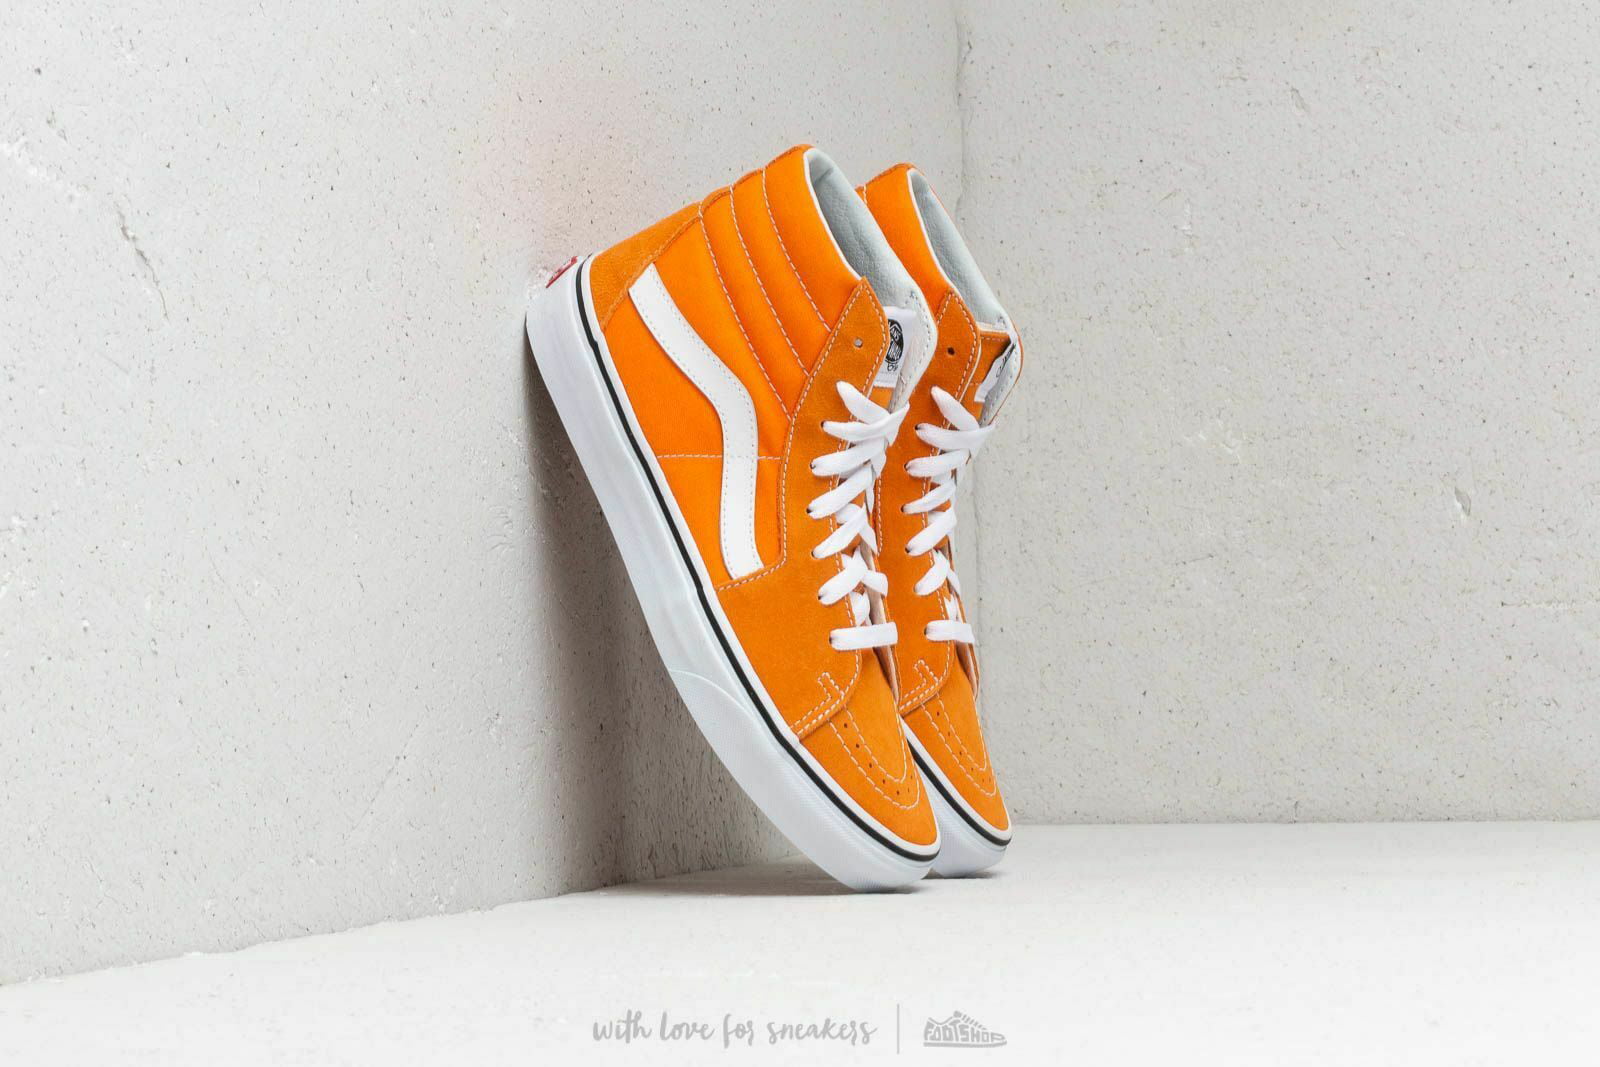 cheddar and white vans